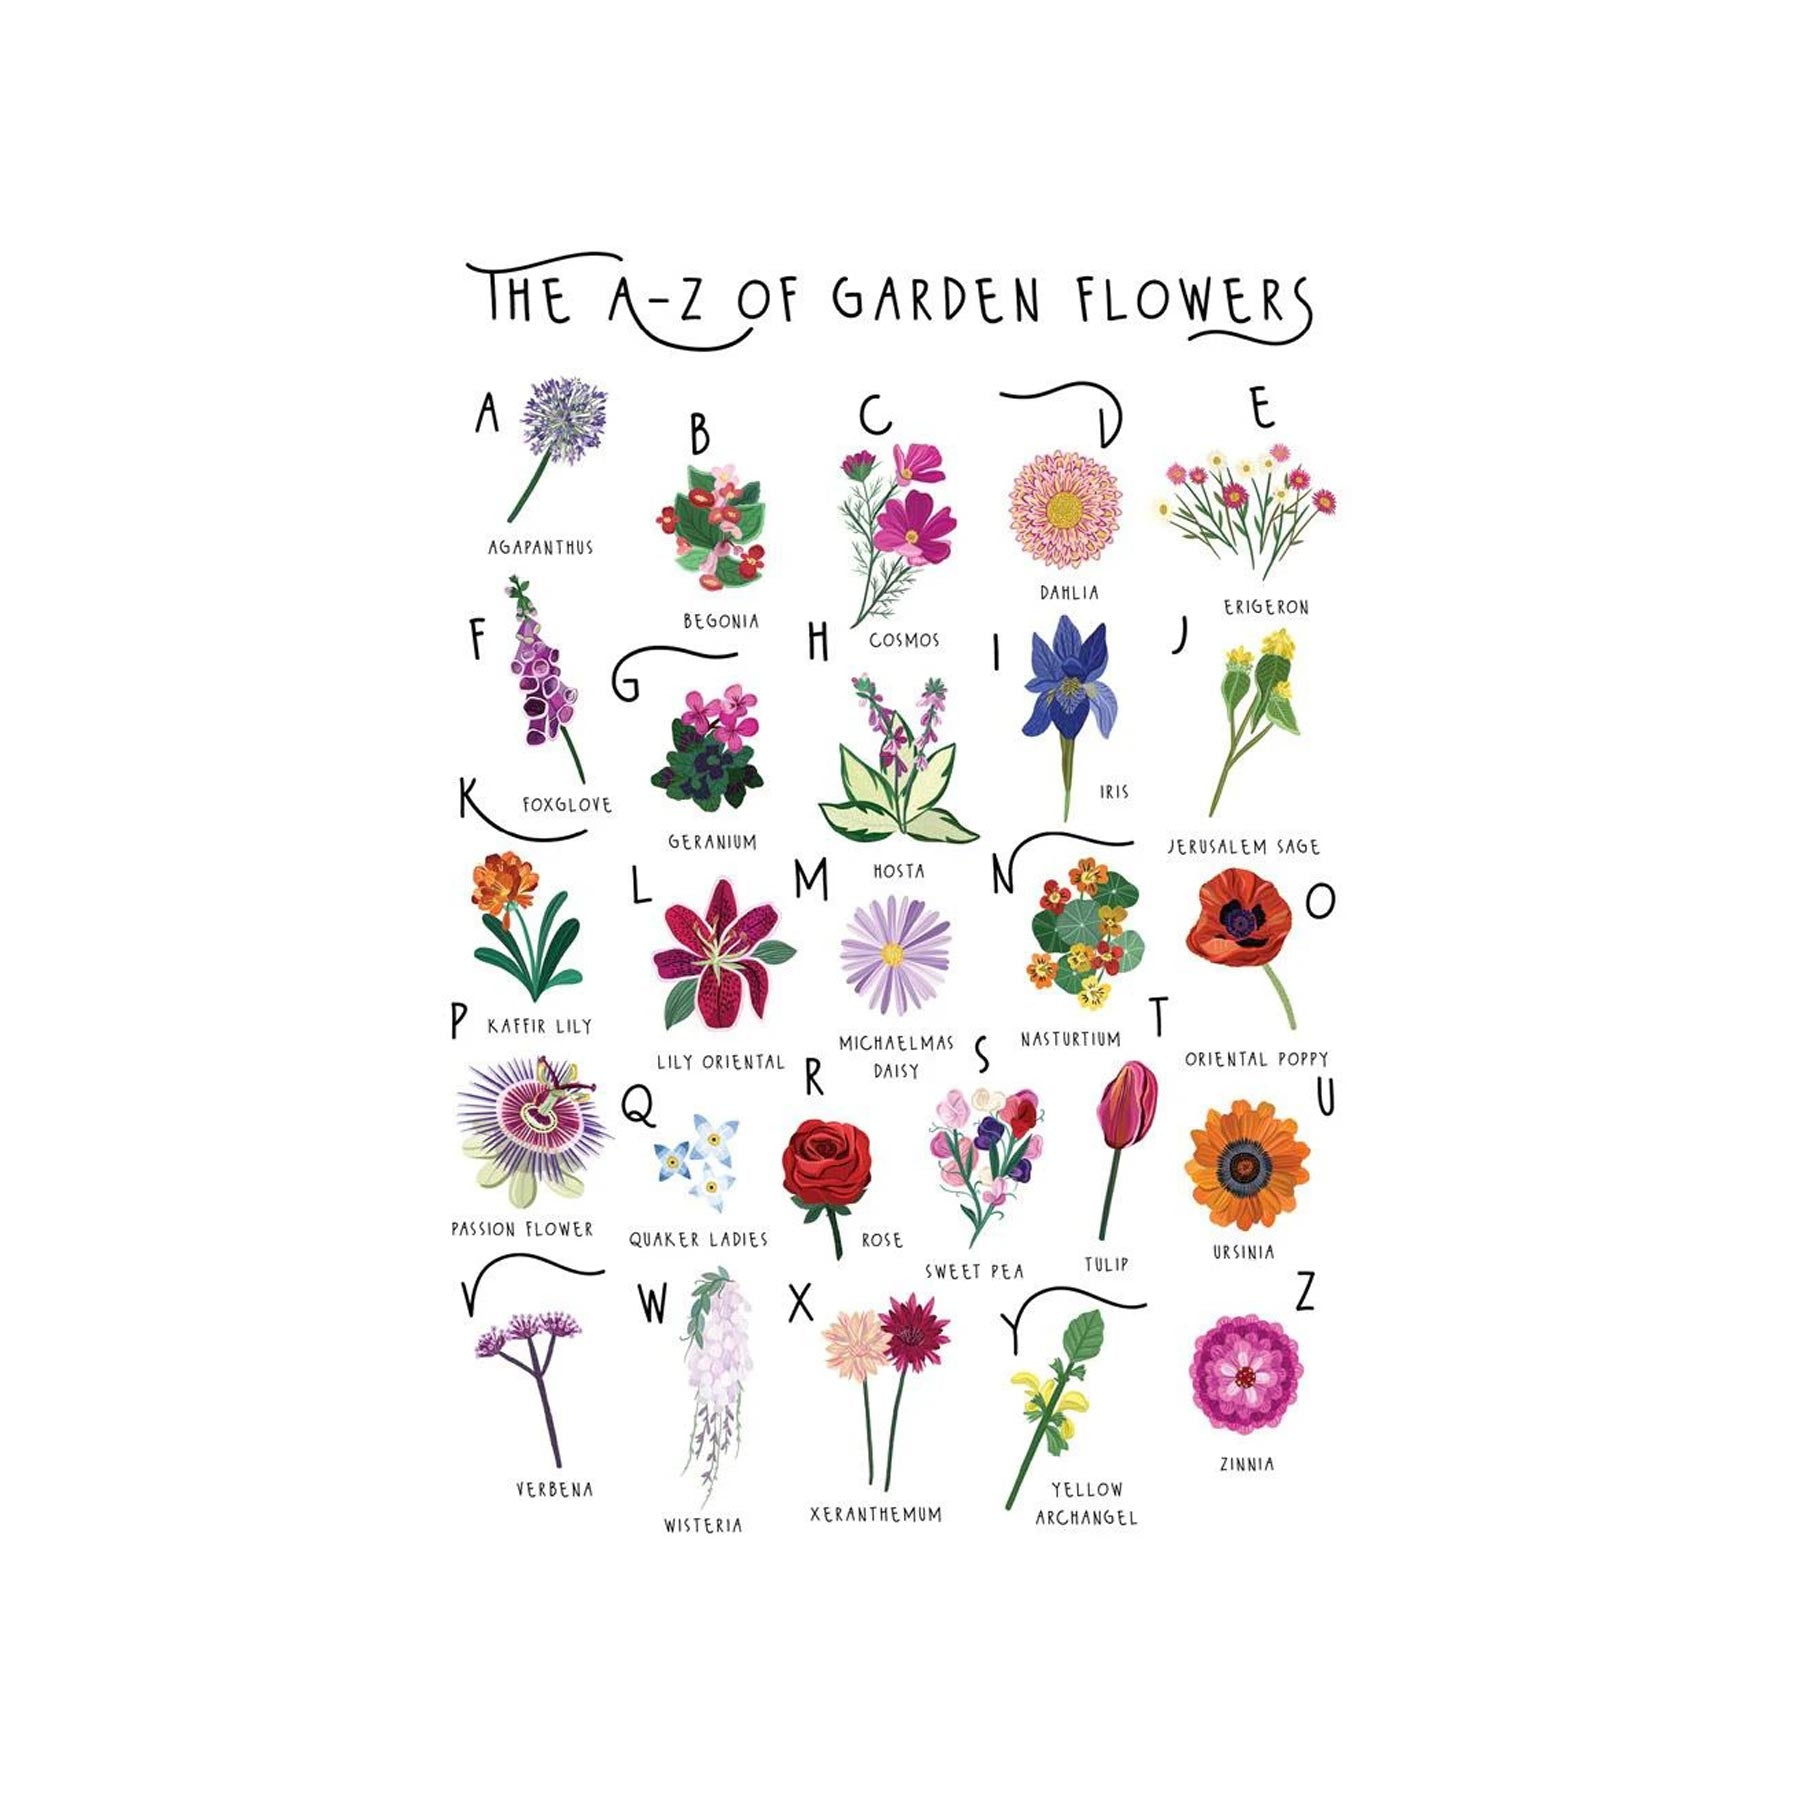 The A-Z of garden flowers greetings card